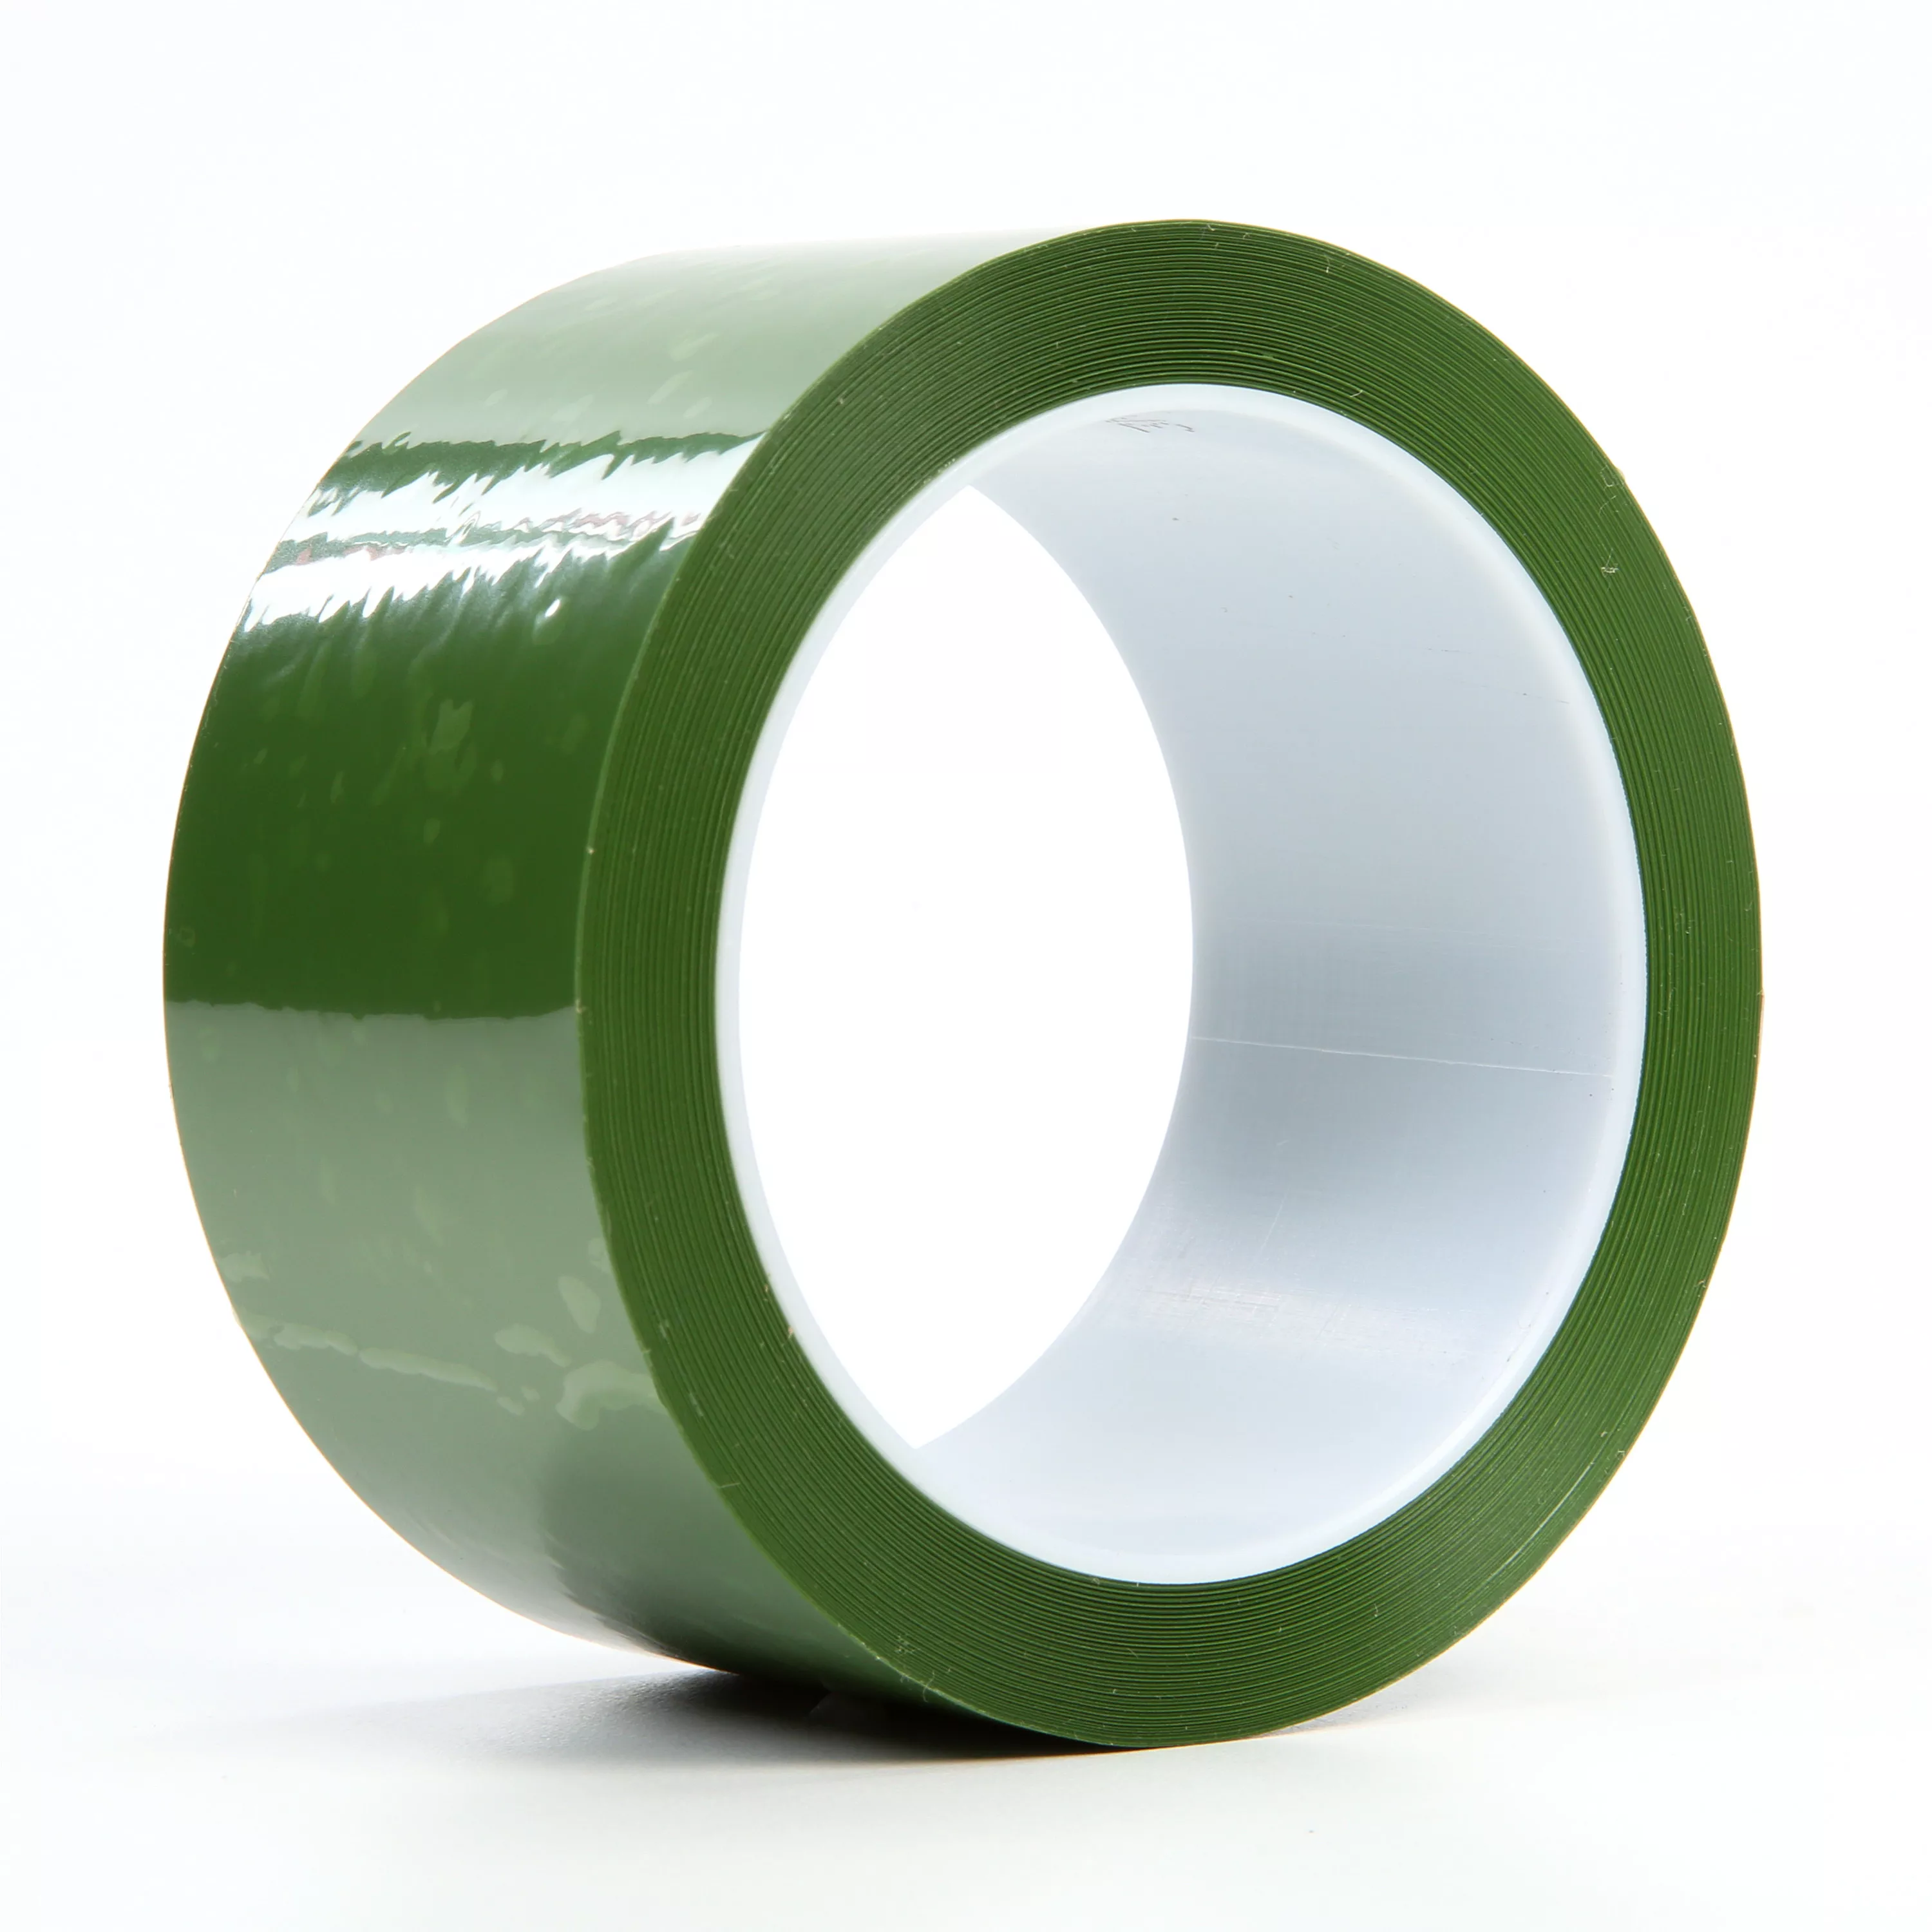 3M™ Polyester Tape 8402, Green, 1.9 mil, 2 in x 72 yd, 24 rolls per case